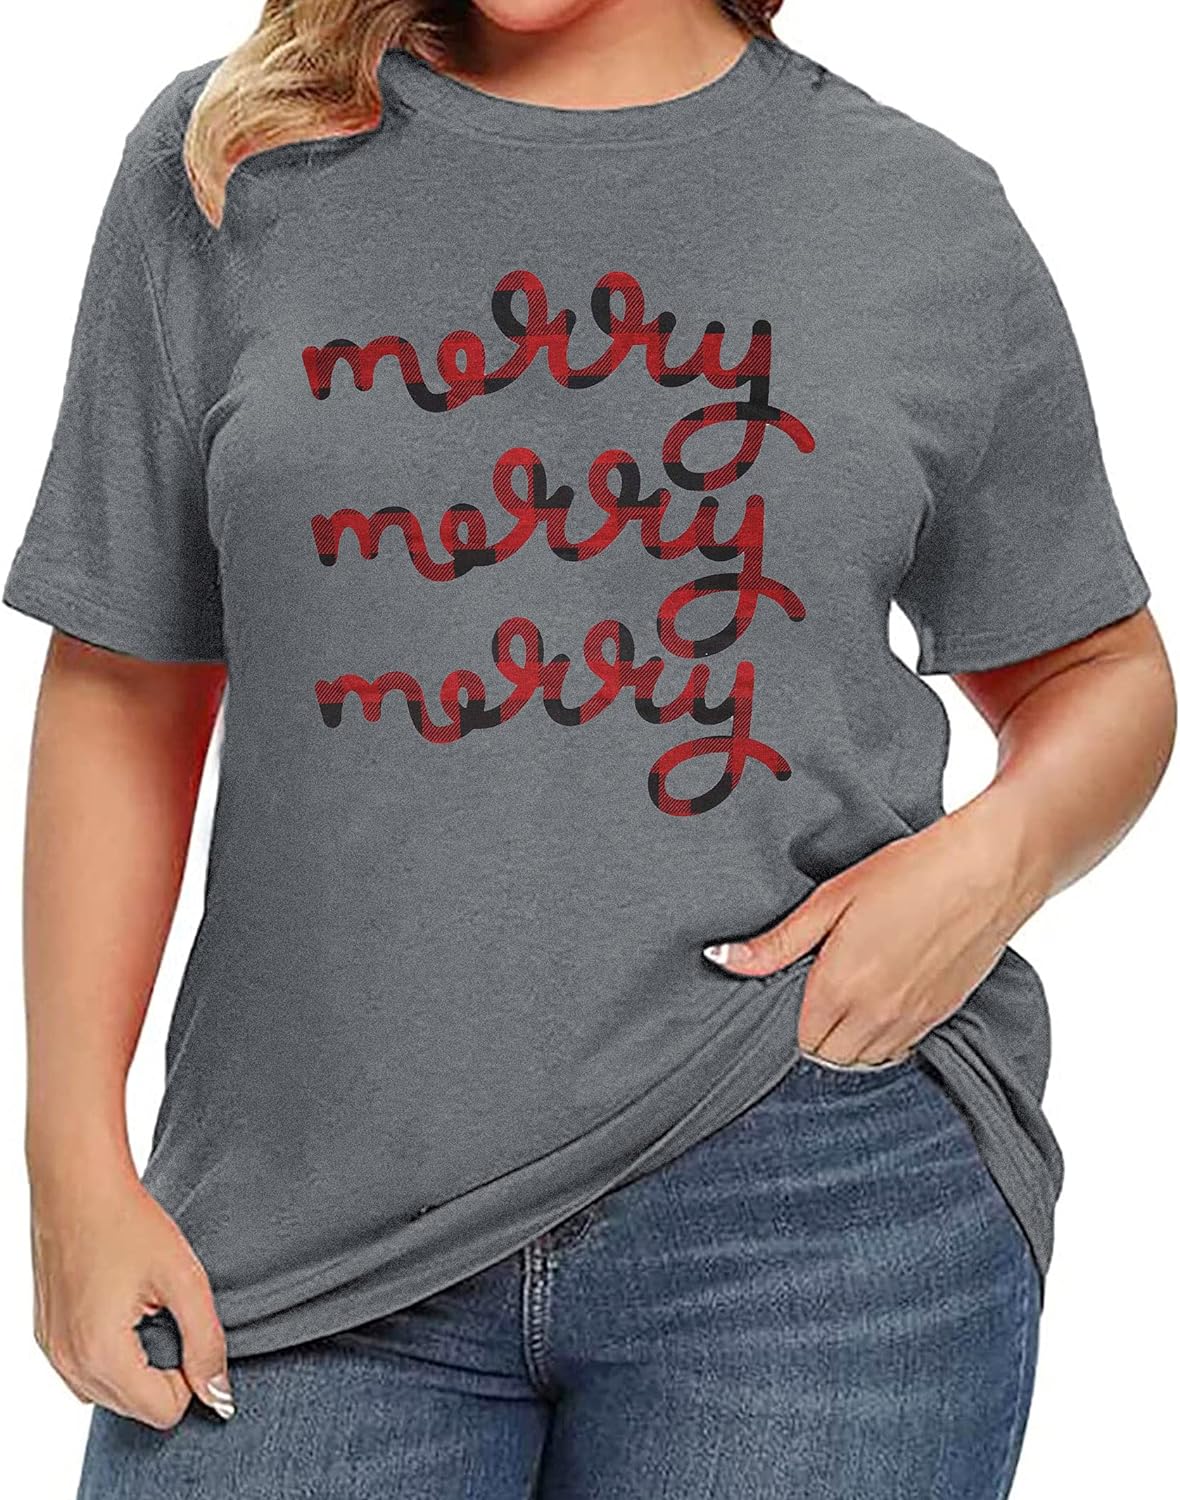 Celebrate the Festive Season with Christmas Plus Size Shirt Women Merry and Bright Tops